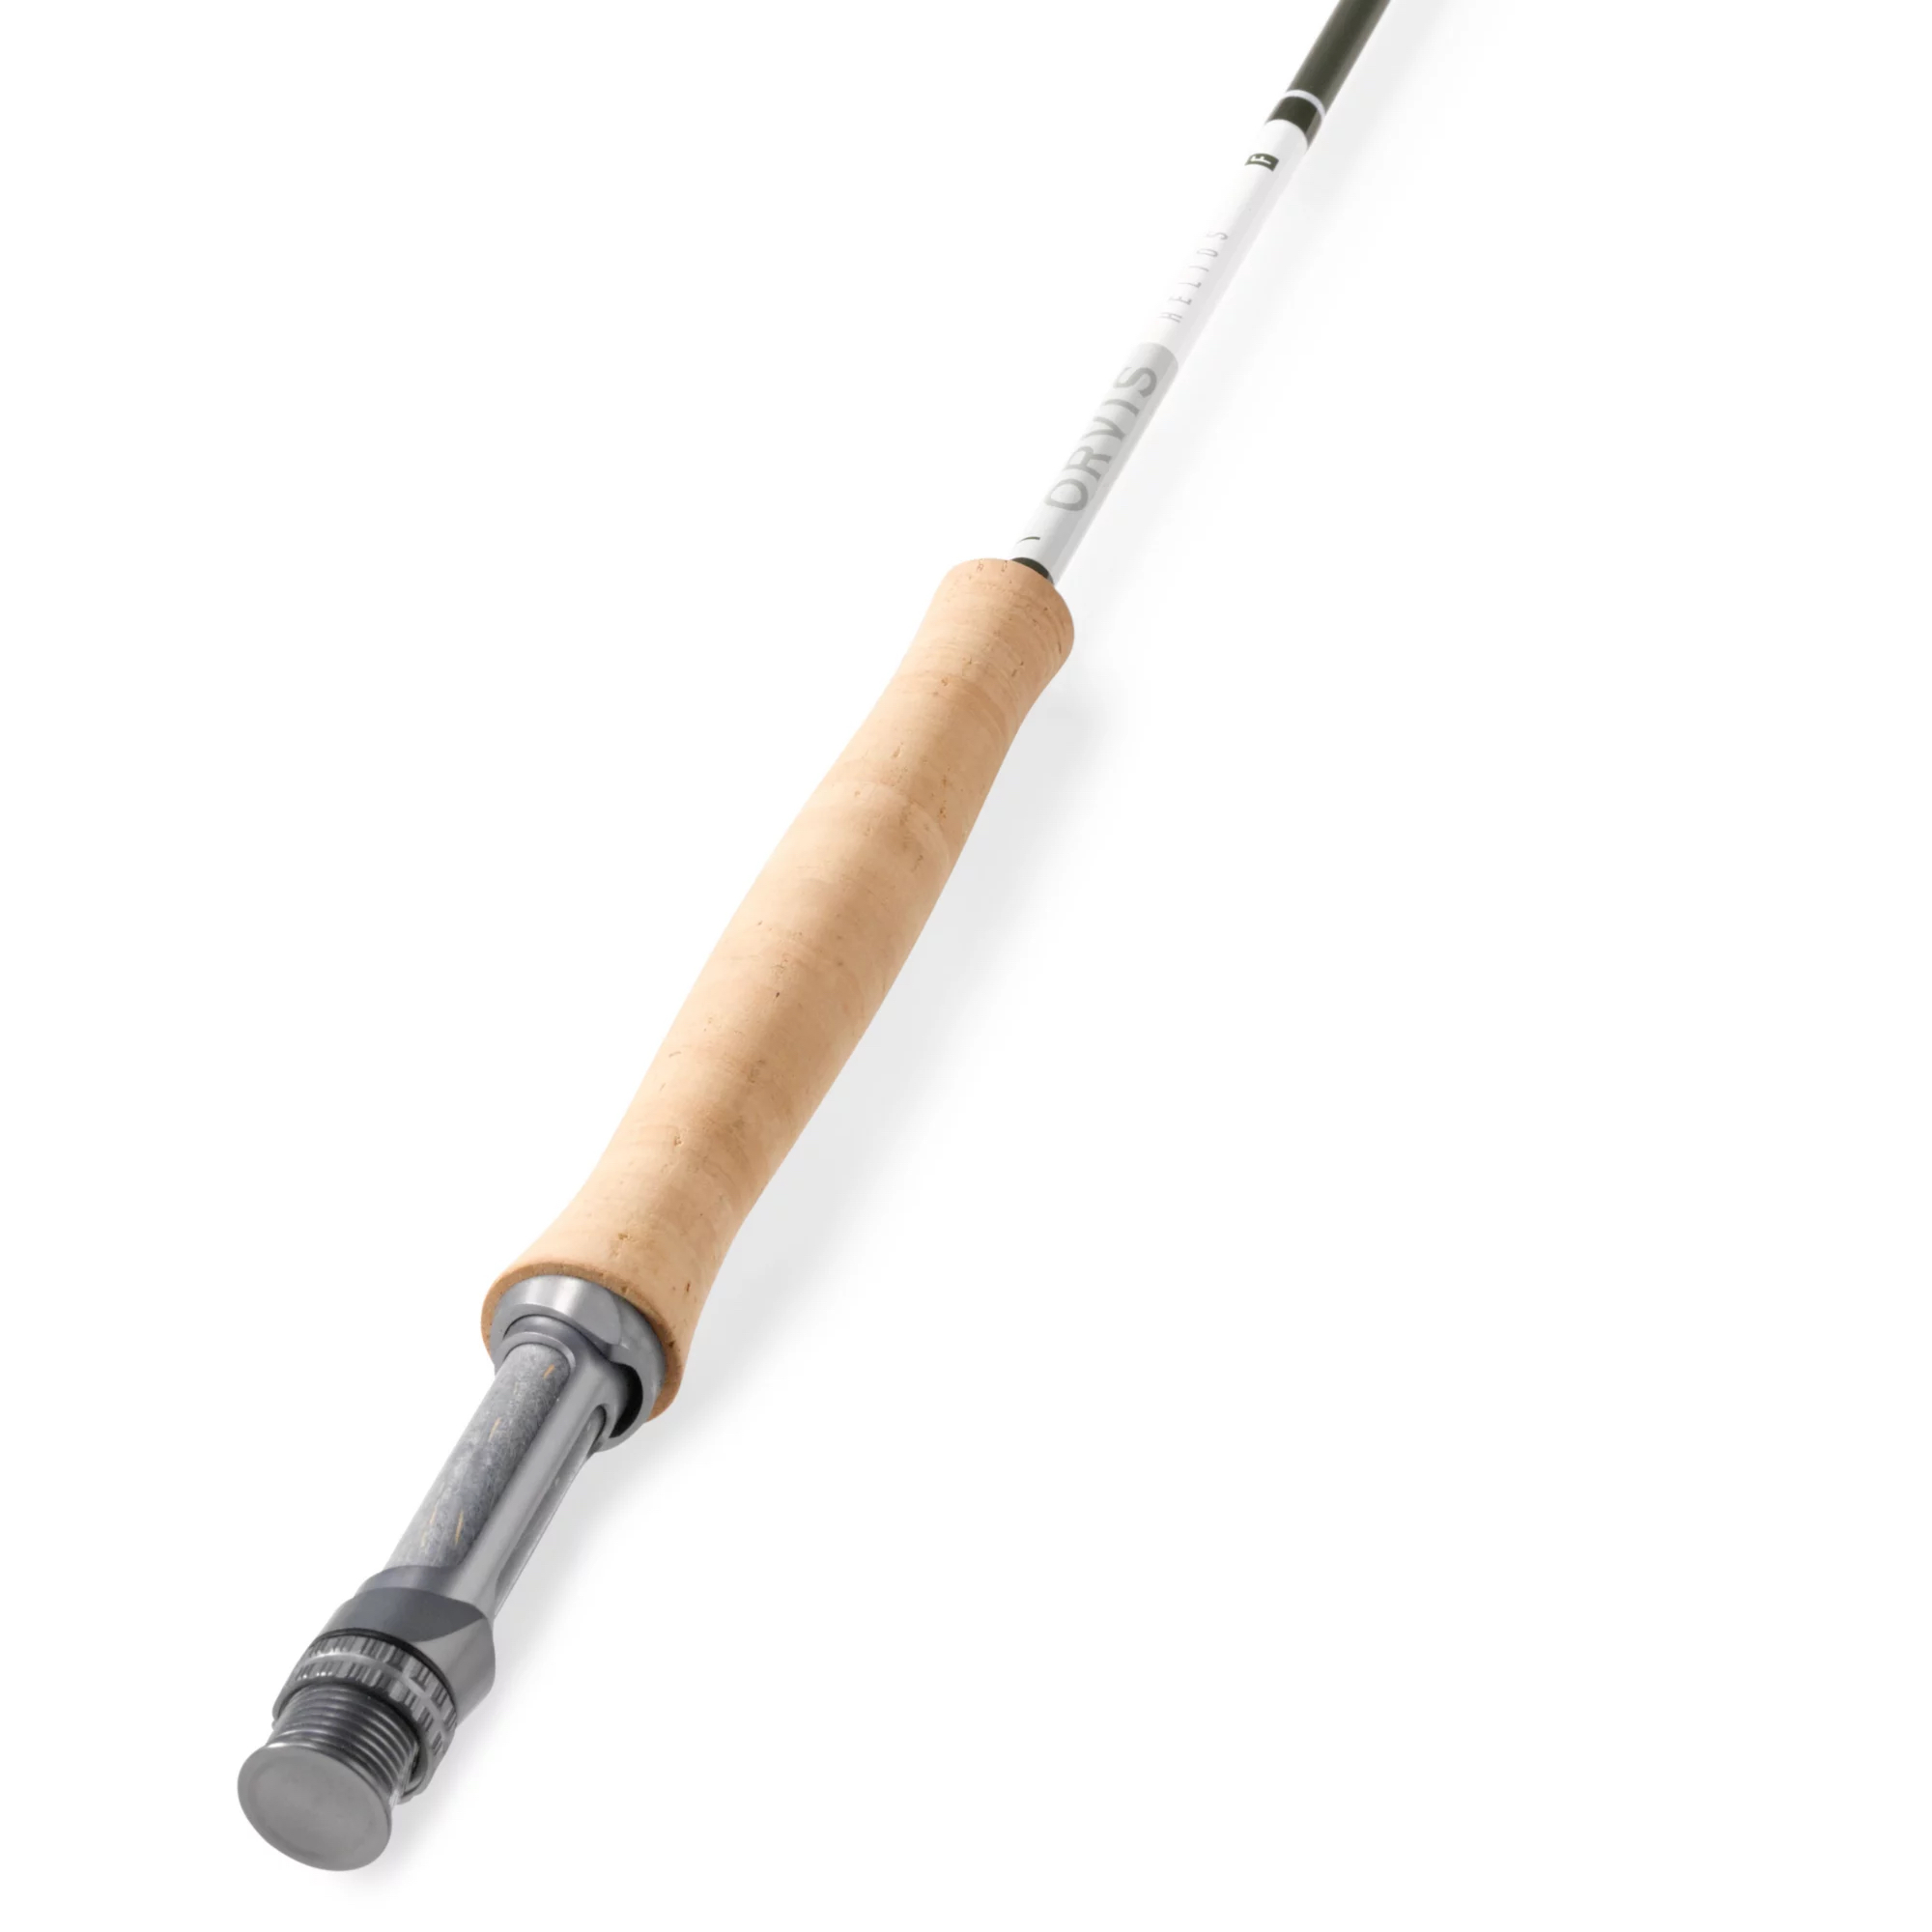 Orvis Helios F 9' 5-weight Fly Rod is the ultimate in performance!